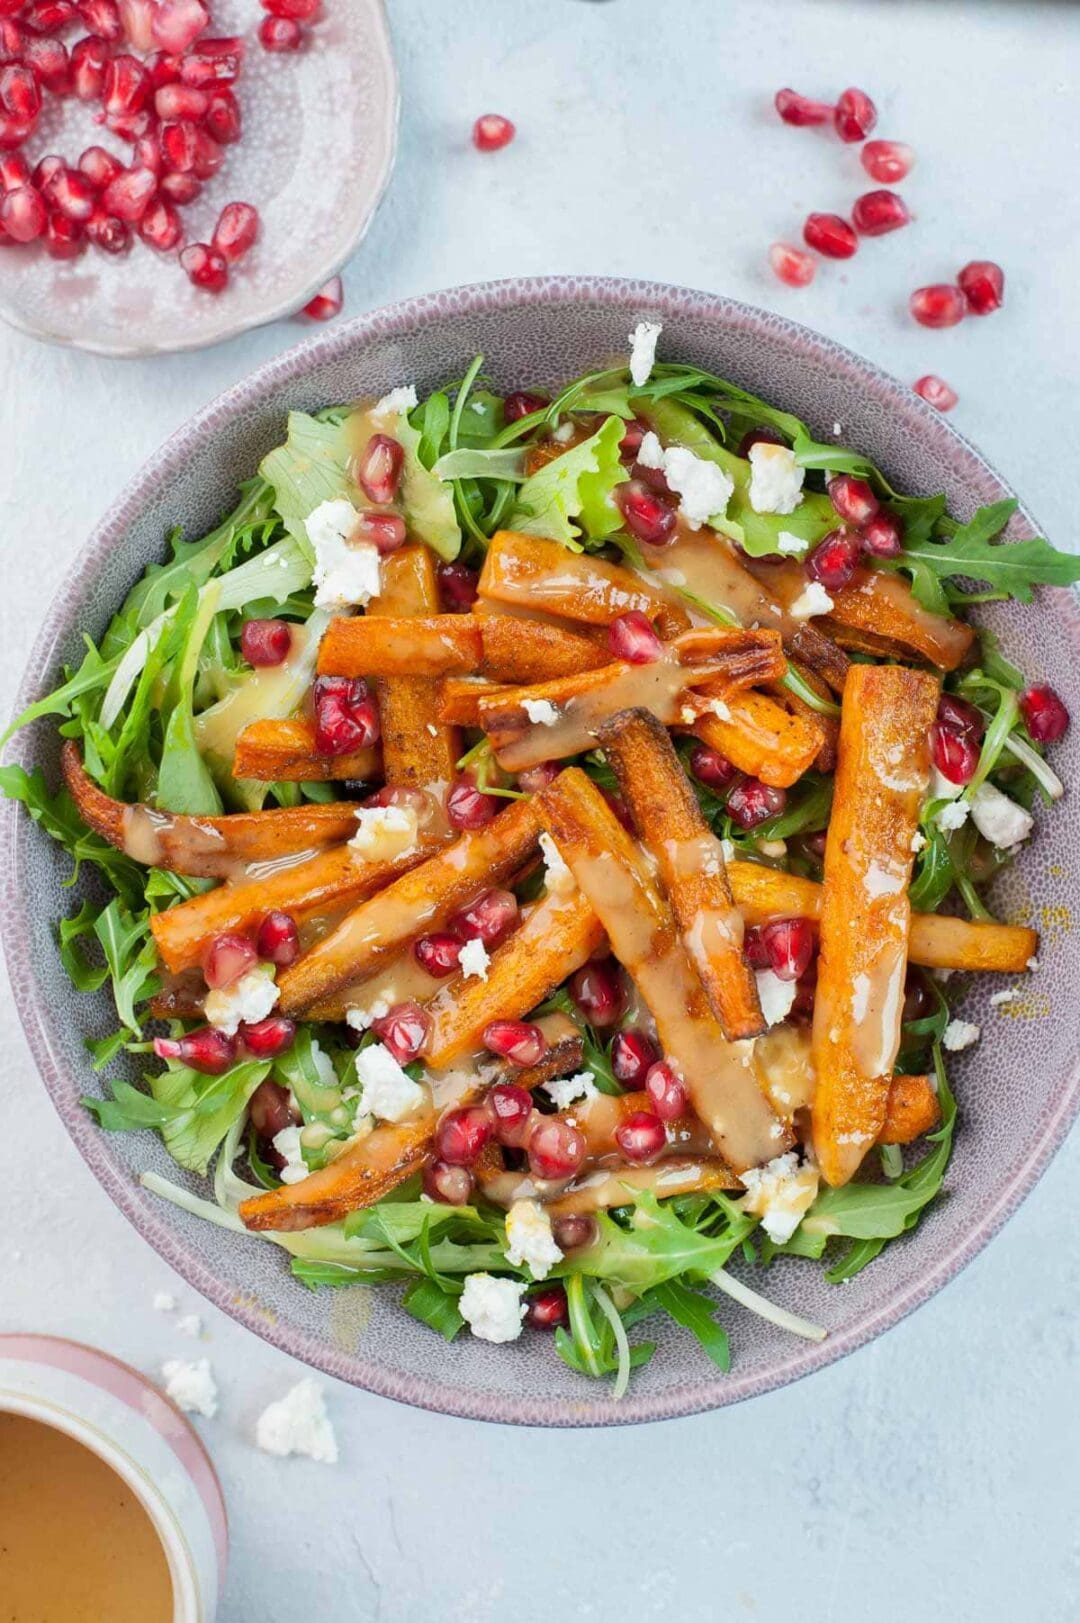 Roasted carrot salad with peanut butter lemon dressing (video)